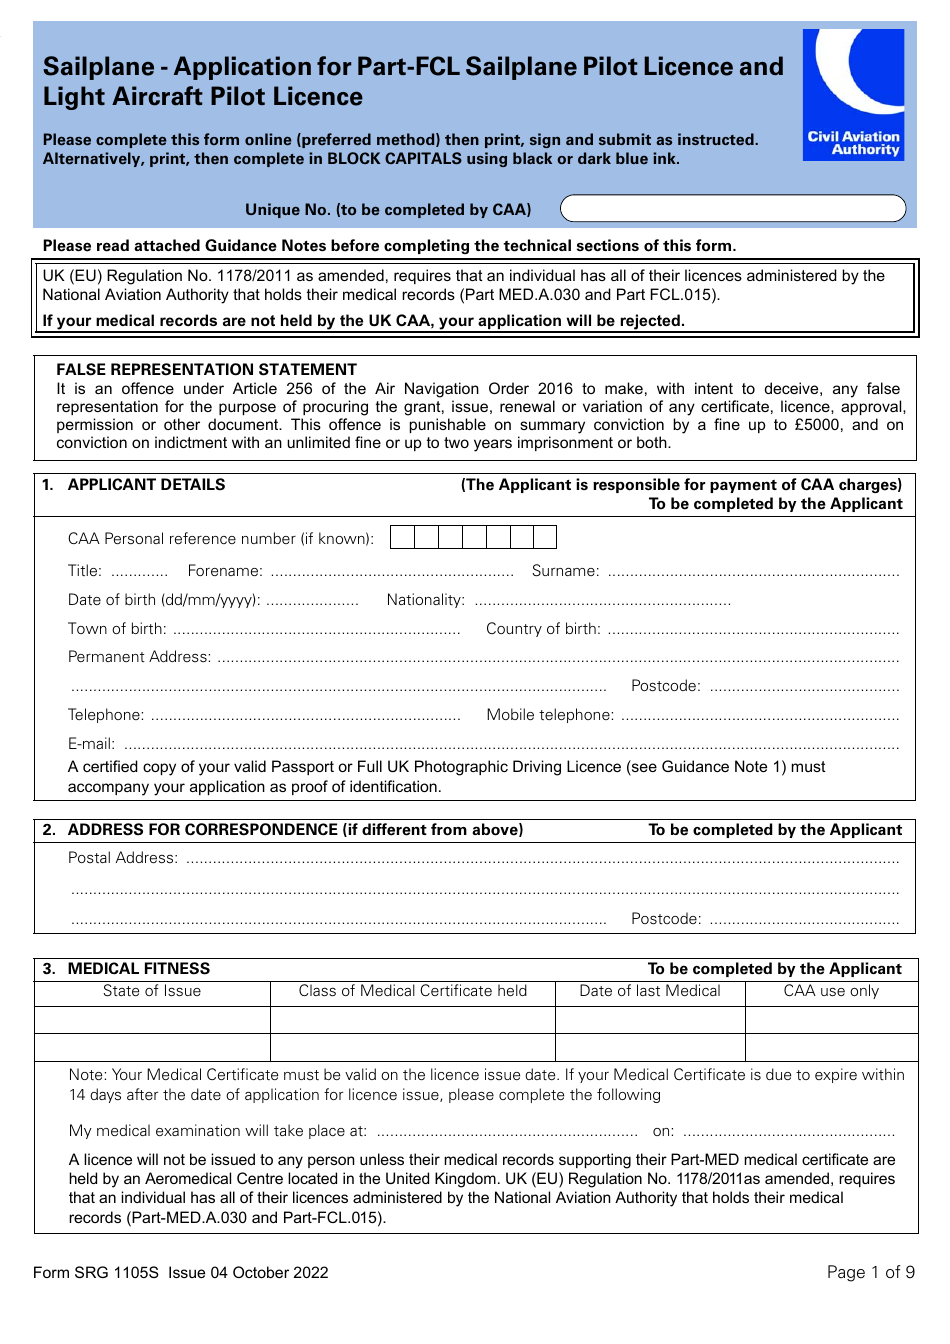 Form SRG1105S Sailplane - Application for Part-Fcl Sailplane Pilot Licence and Light Aircraft Pilot Licence - United Kingdom, Page 1